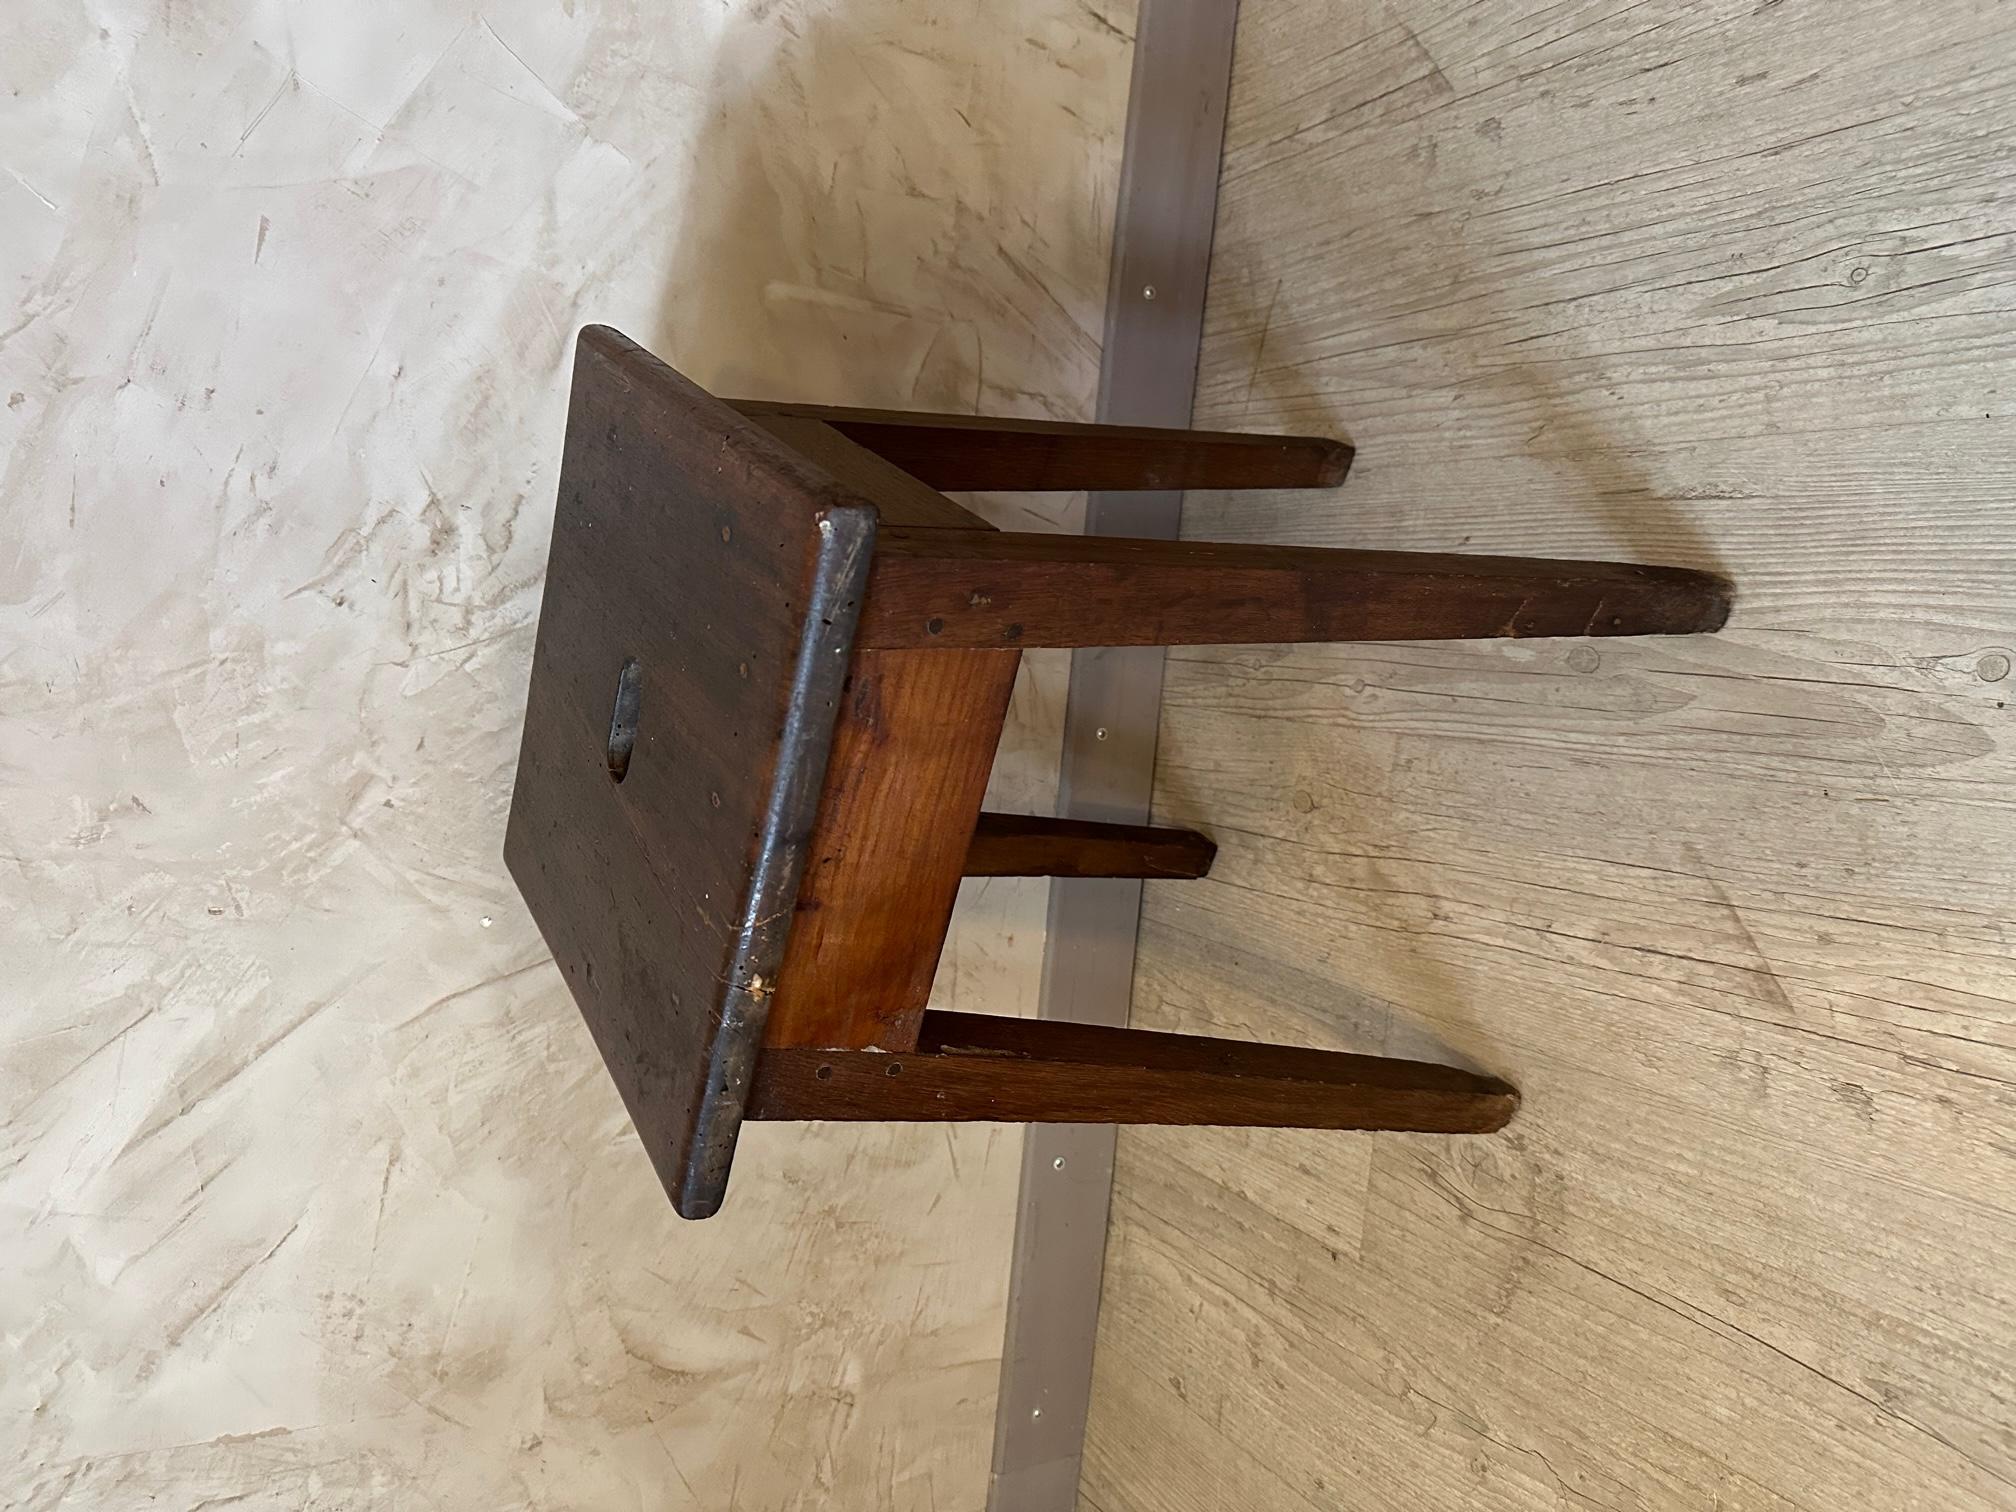 Very nice workshop stool in dark oak dating from the 1920s. Fully doweled. A hole in the center of the seat to allow the stool to be carried easily. Ideal height for working. Good condition.